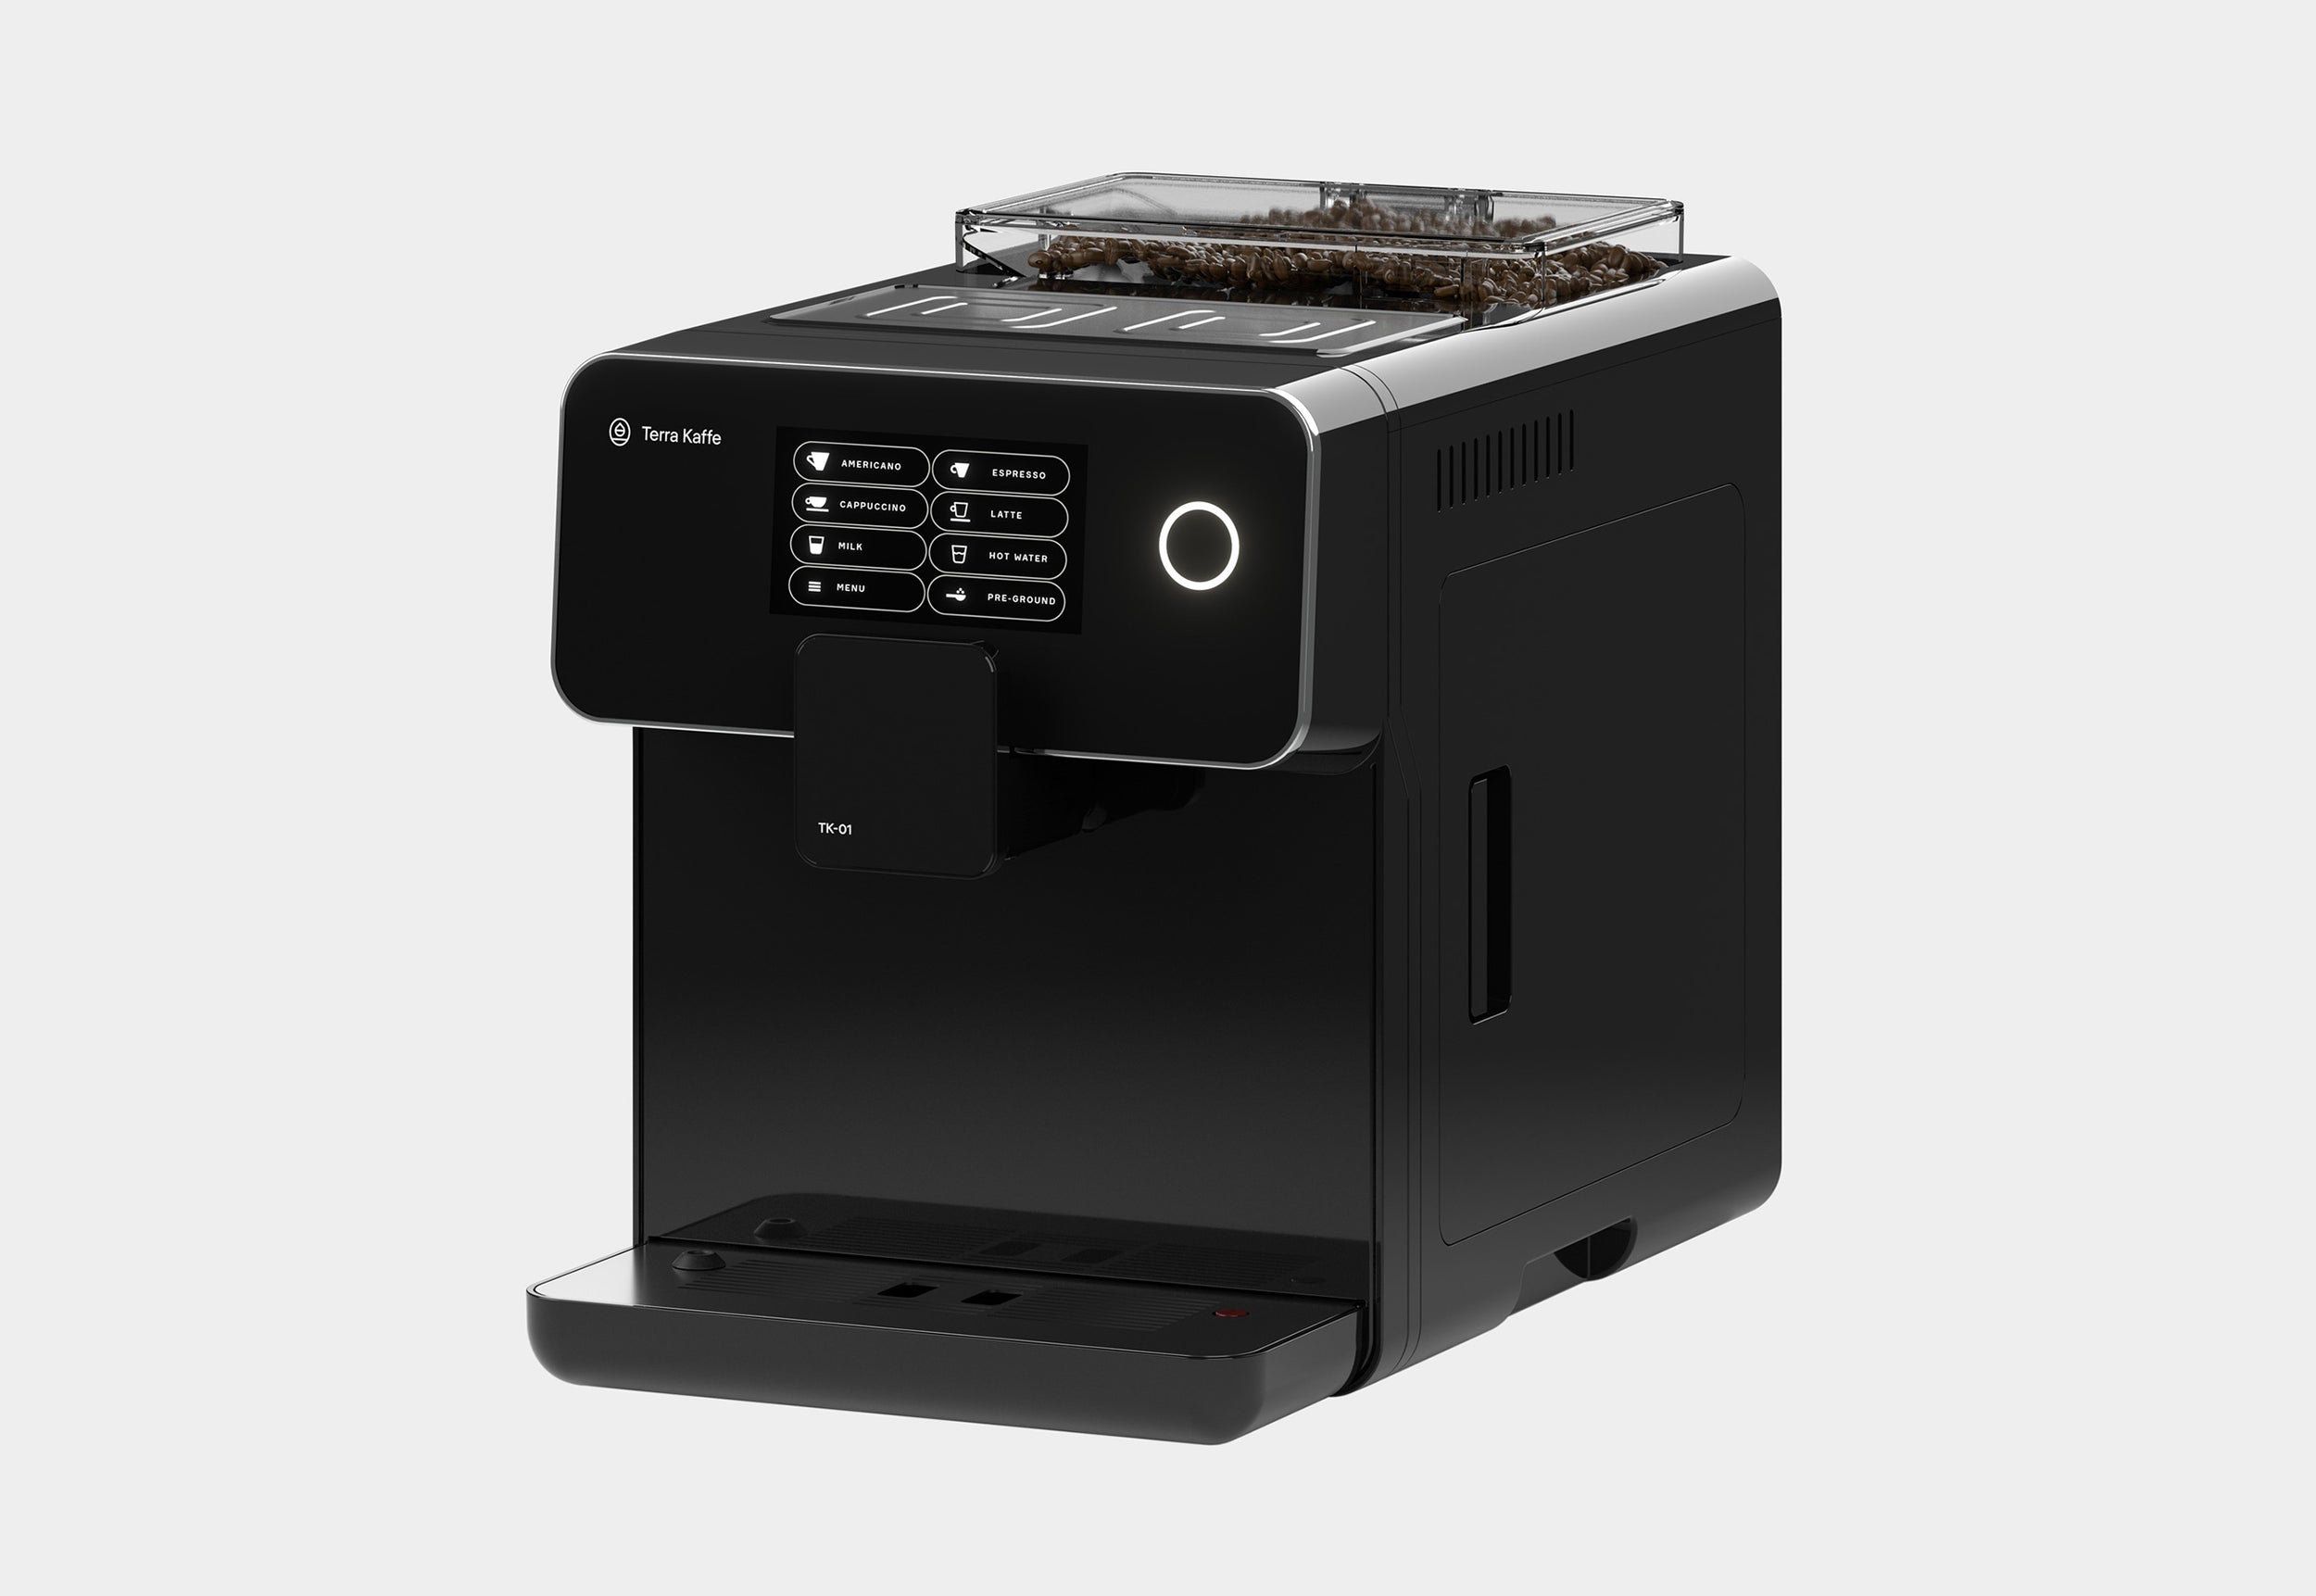 Is This Bluetooth-Enabled Smart Coffee Maker Worth $2,500?